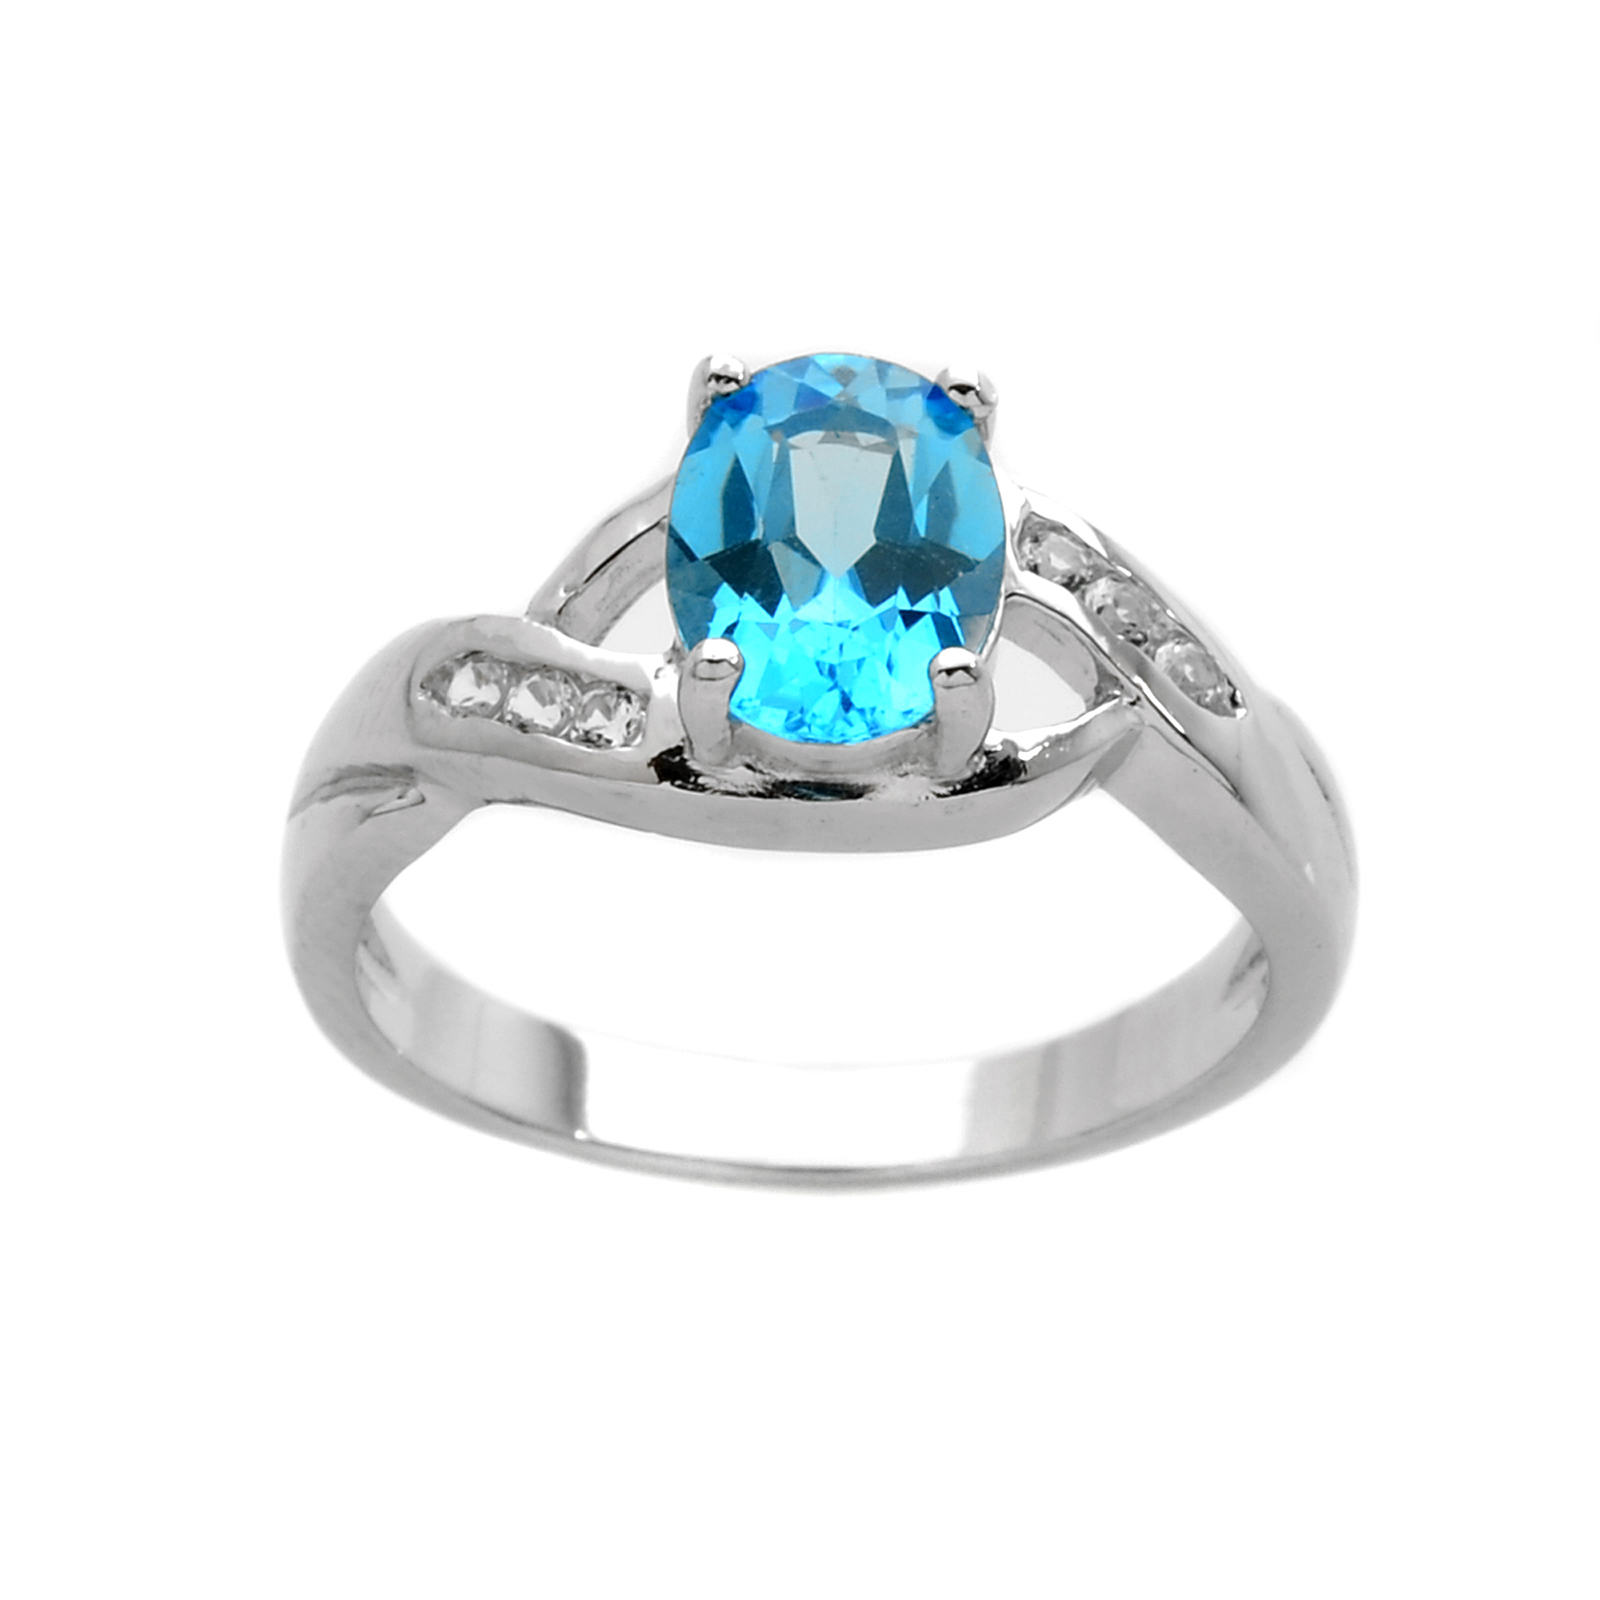 Sterling Silver Blue Topaz  & White Topaz  Ring - Size 7 Only